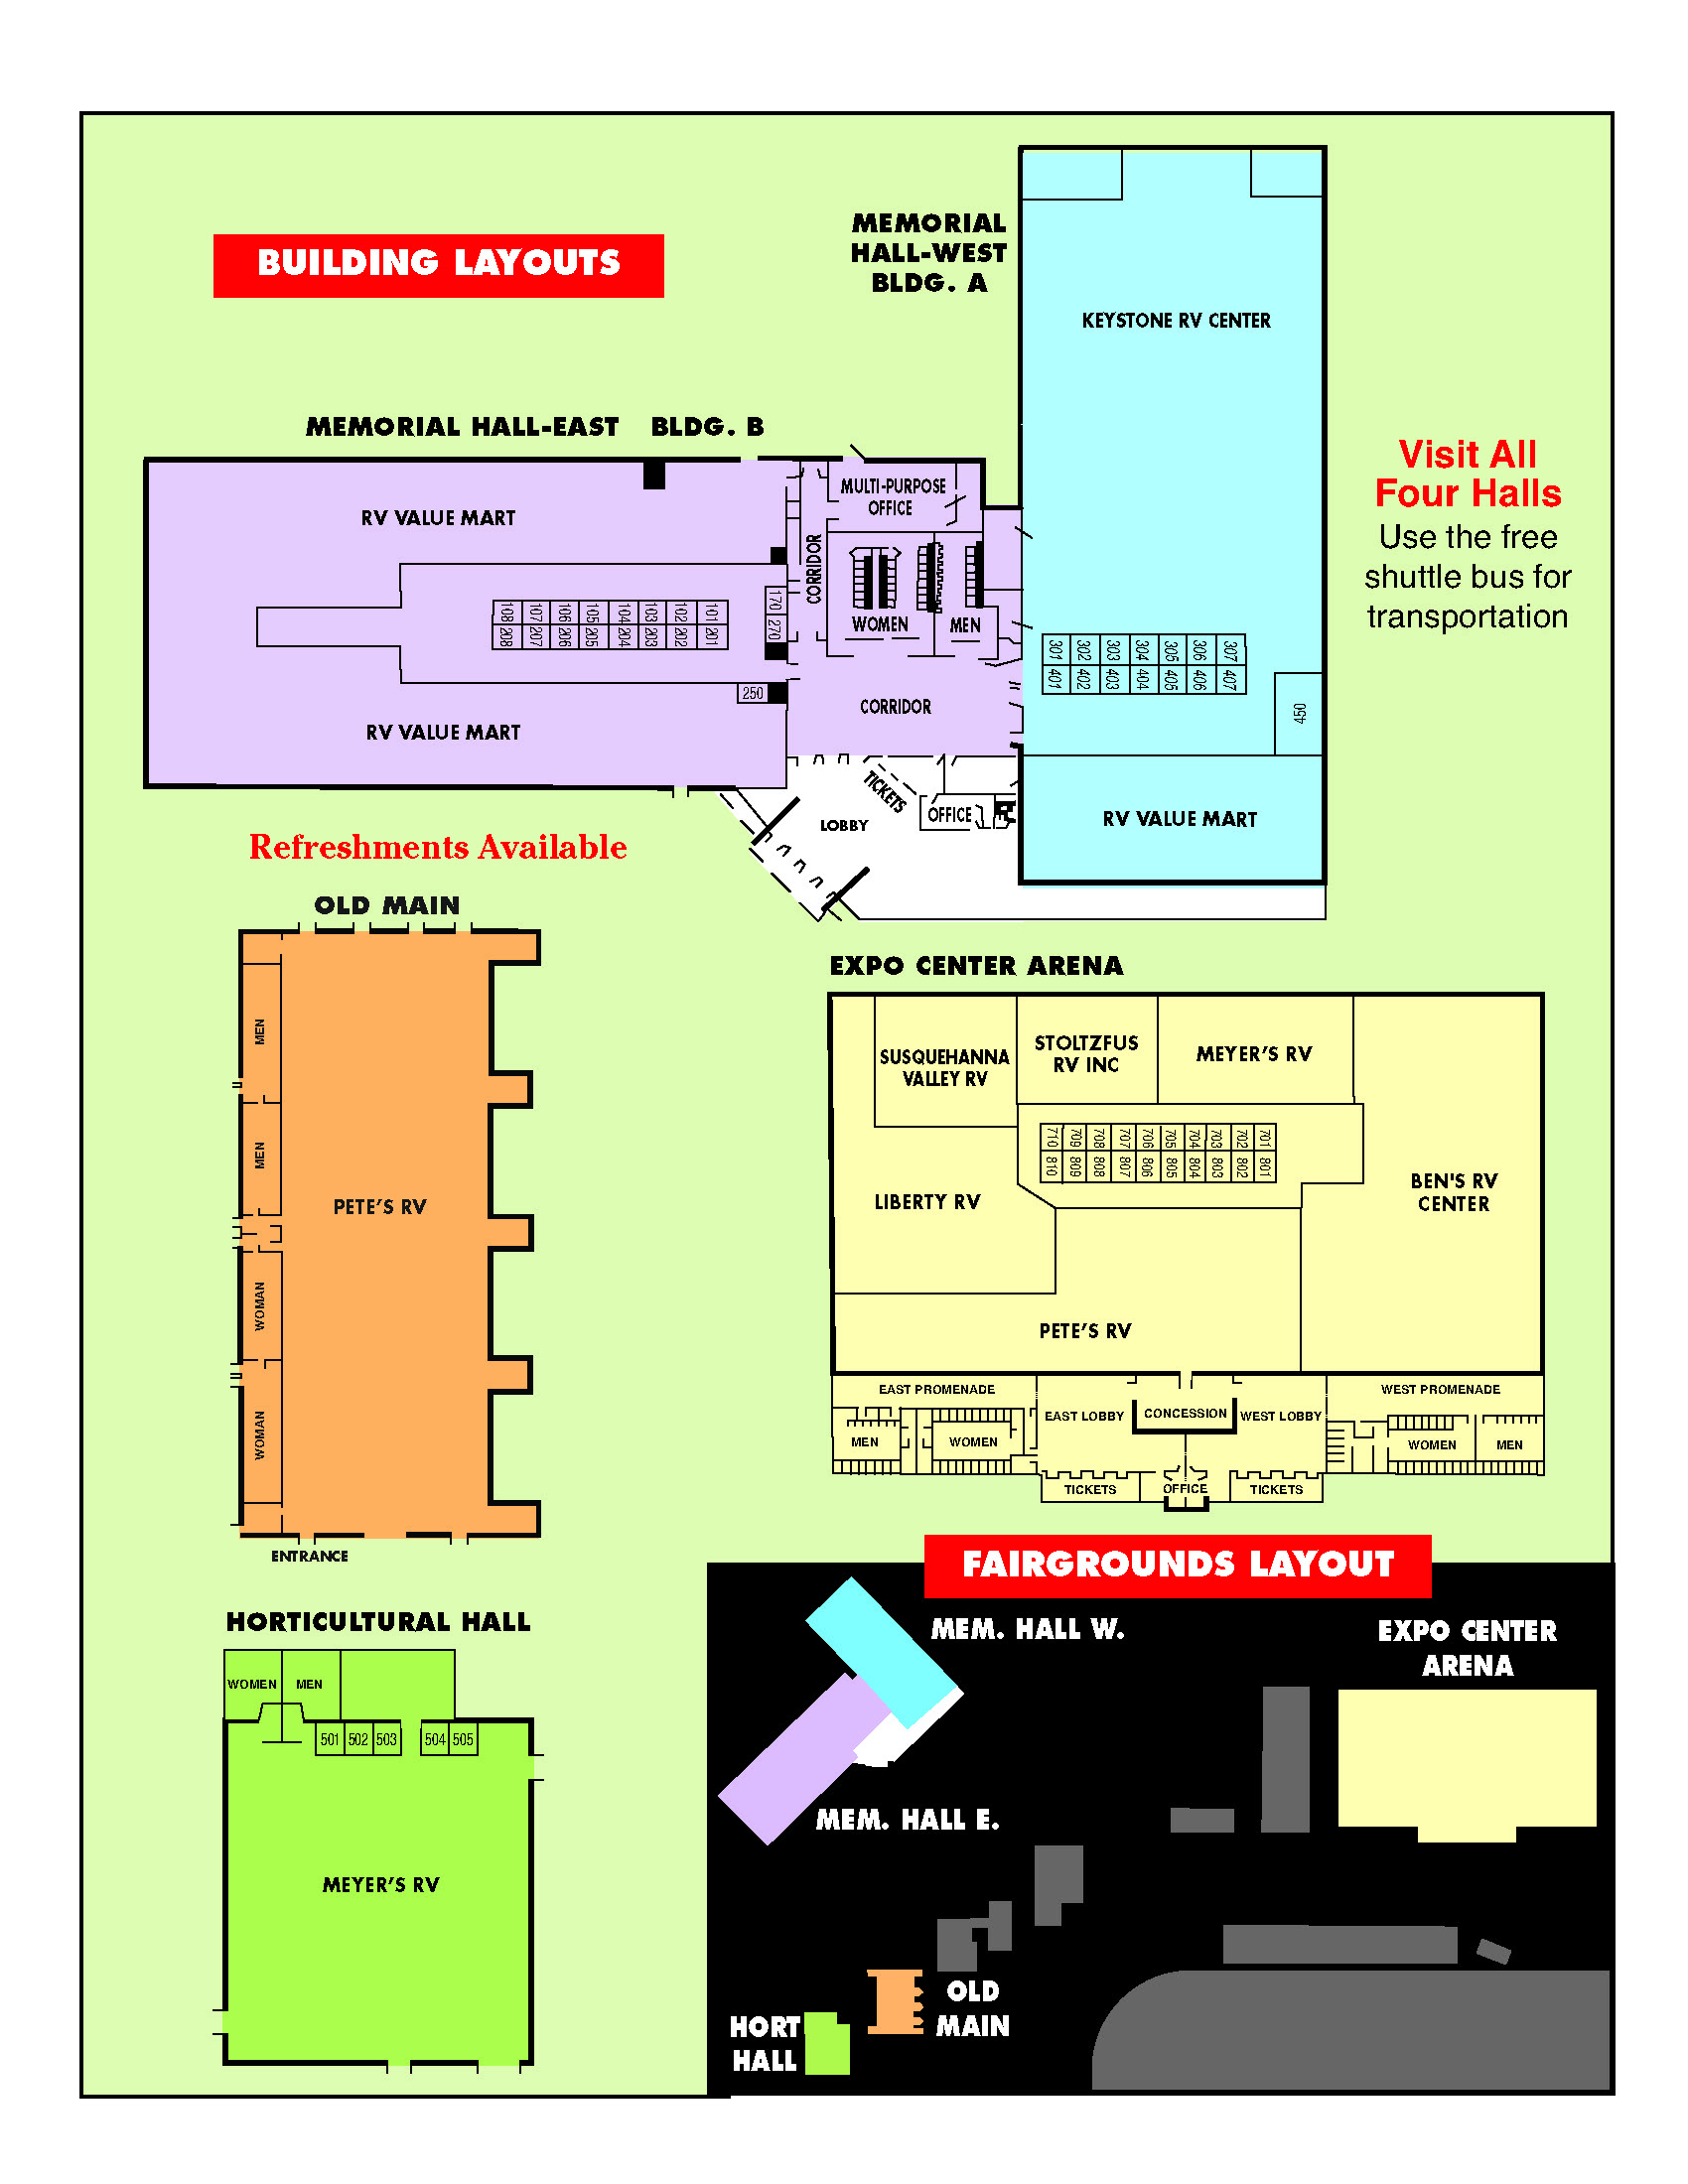 RV Show Map